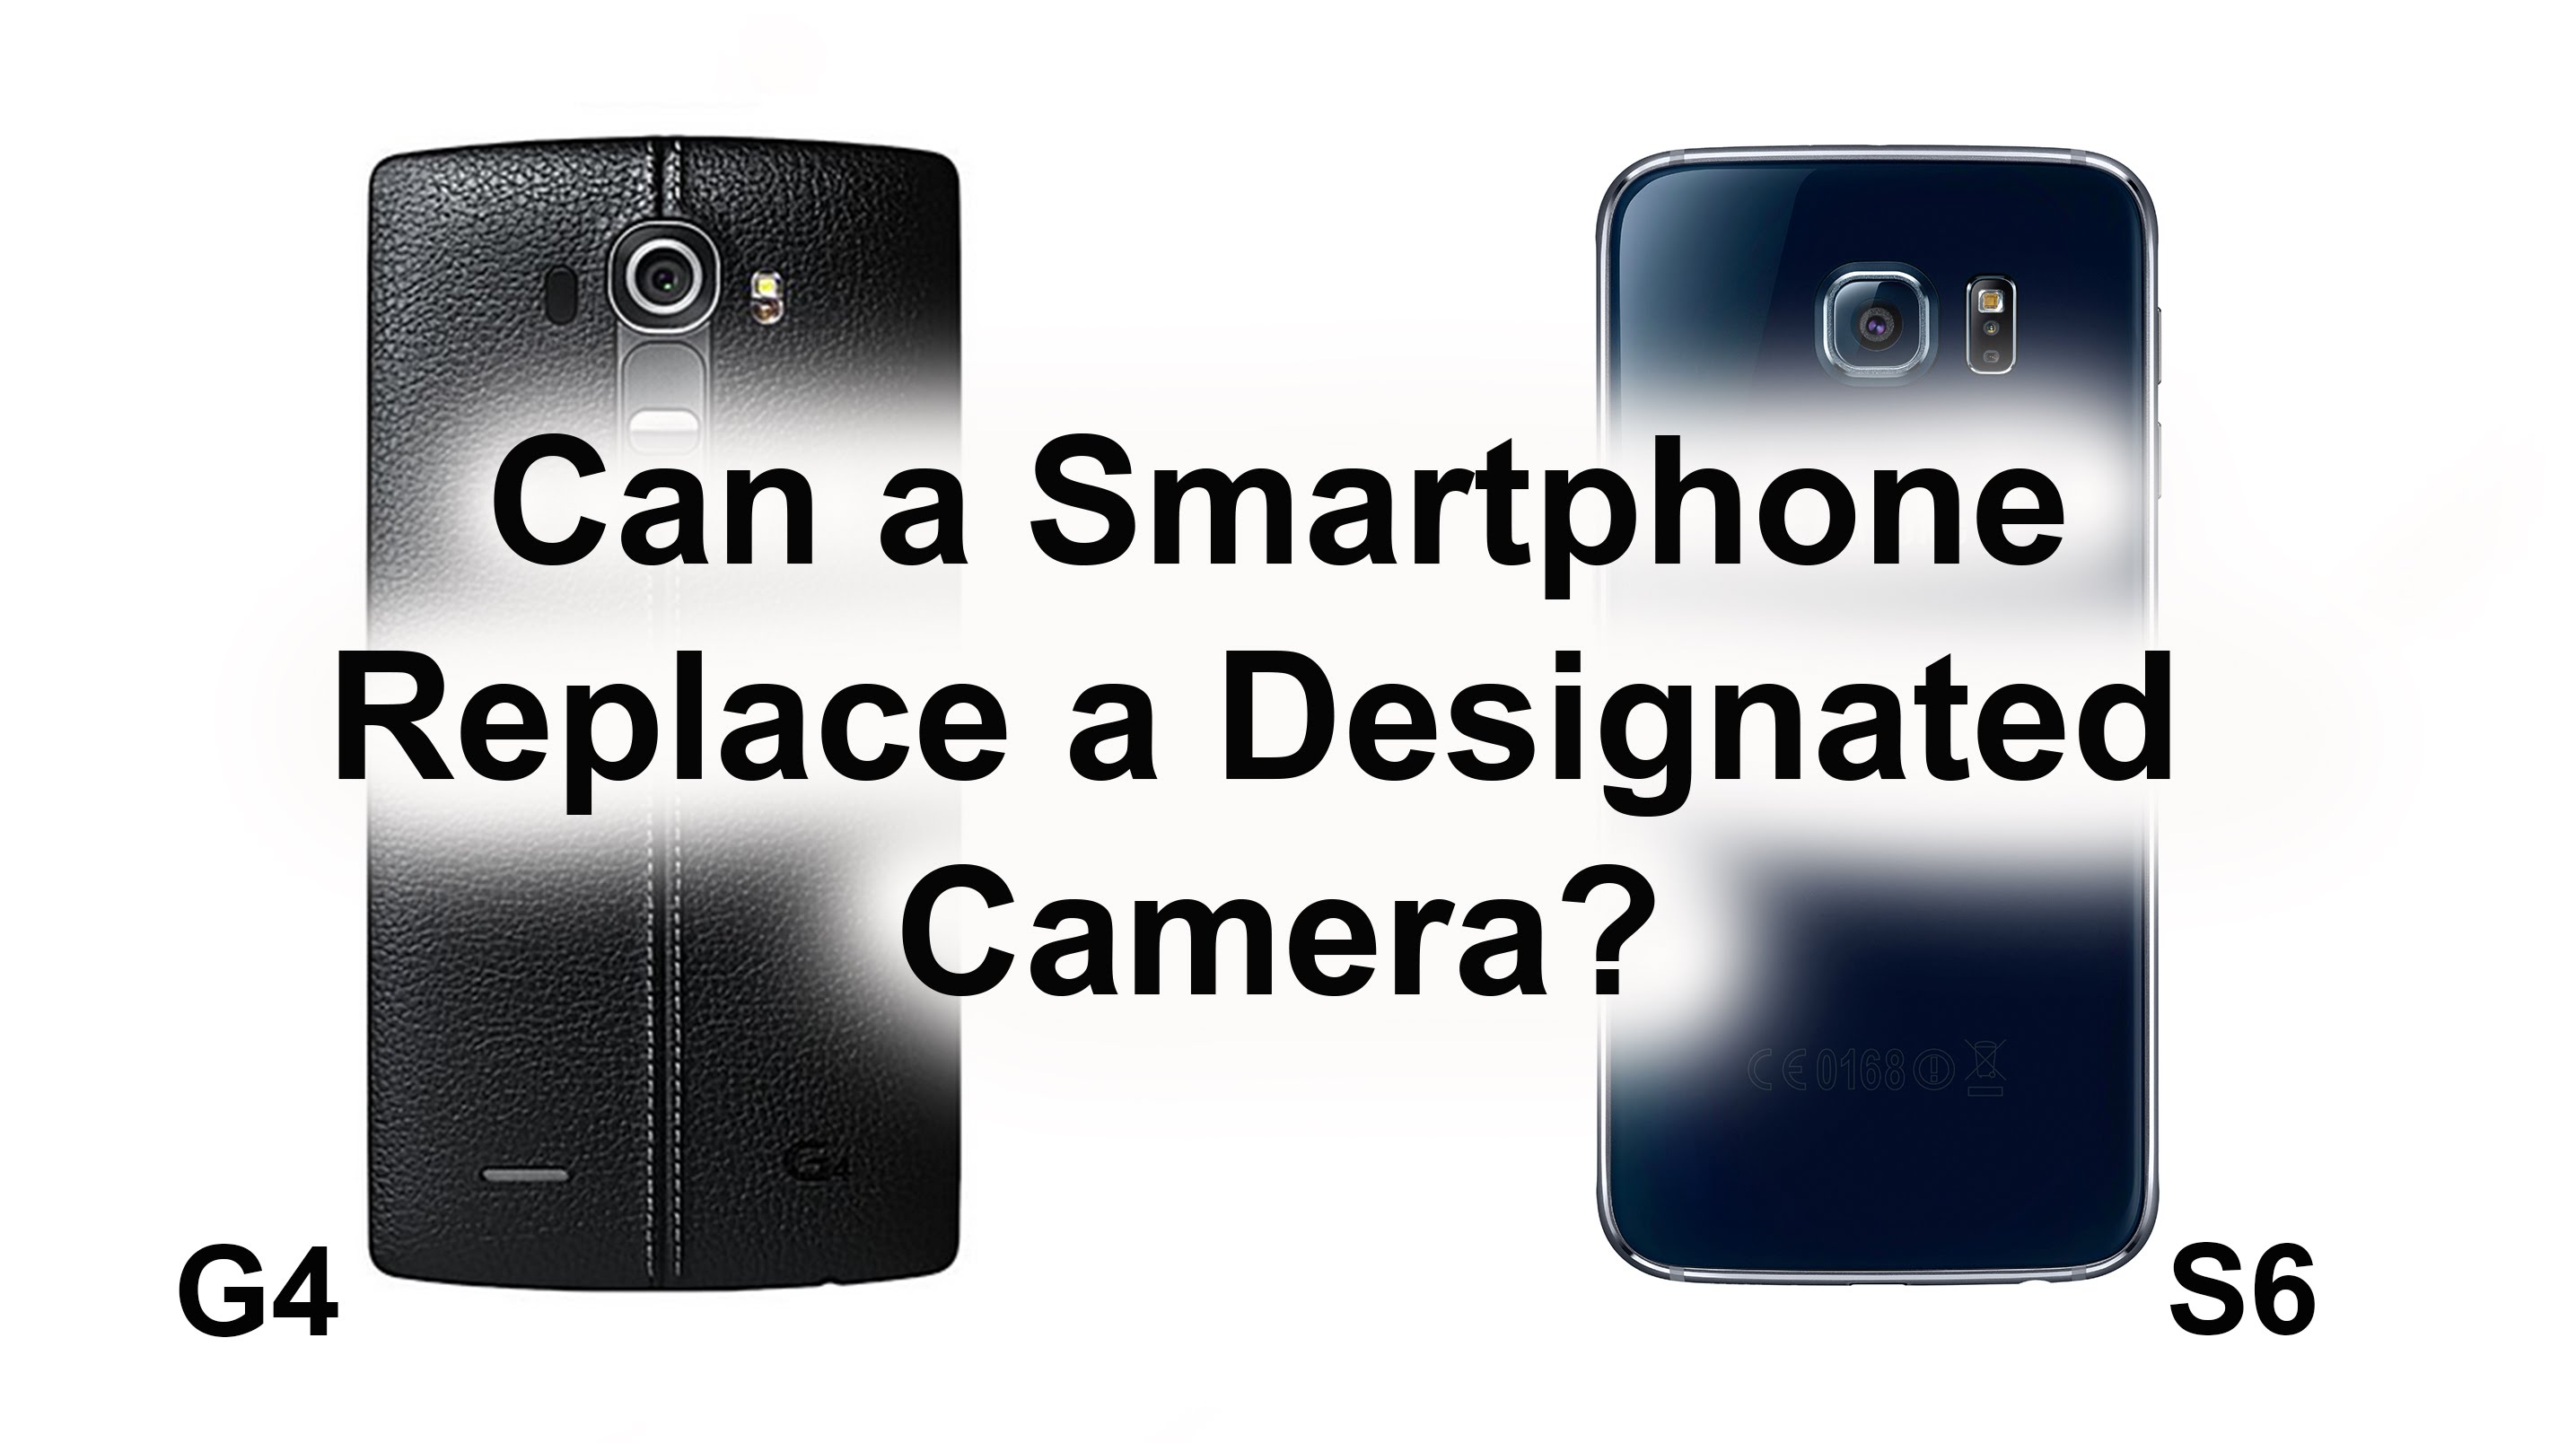 Can Smartphones Replace Designated Cameras for Video Recording? (Filmed with S6 & G4)